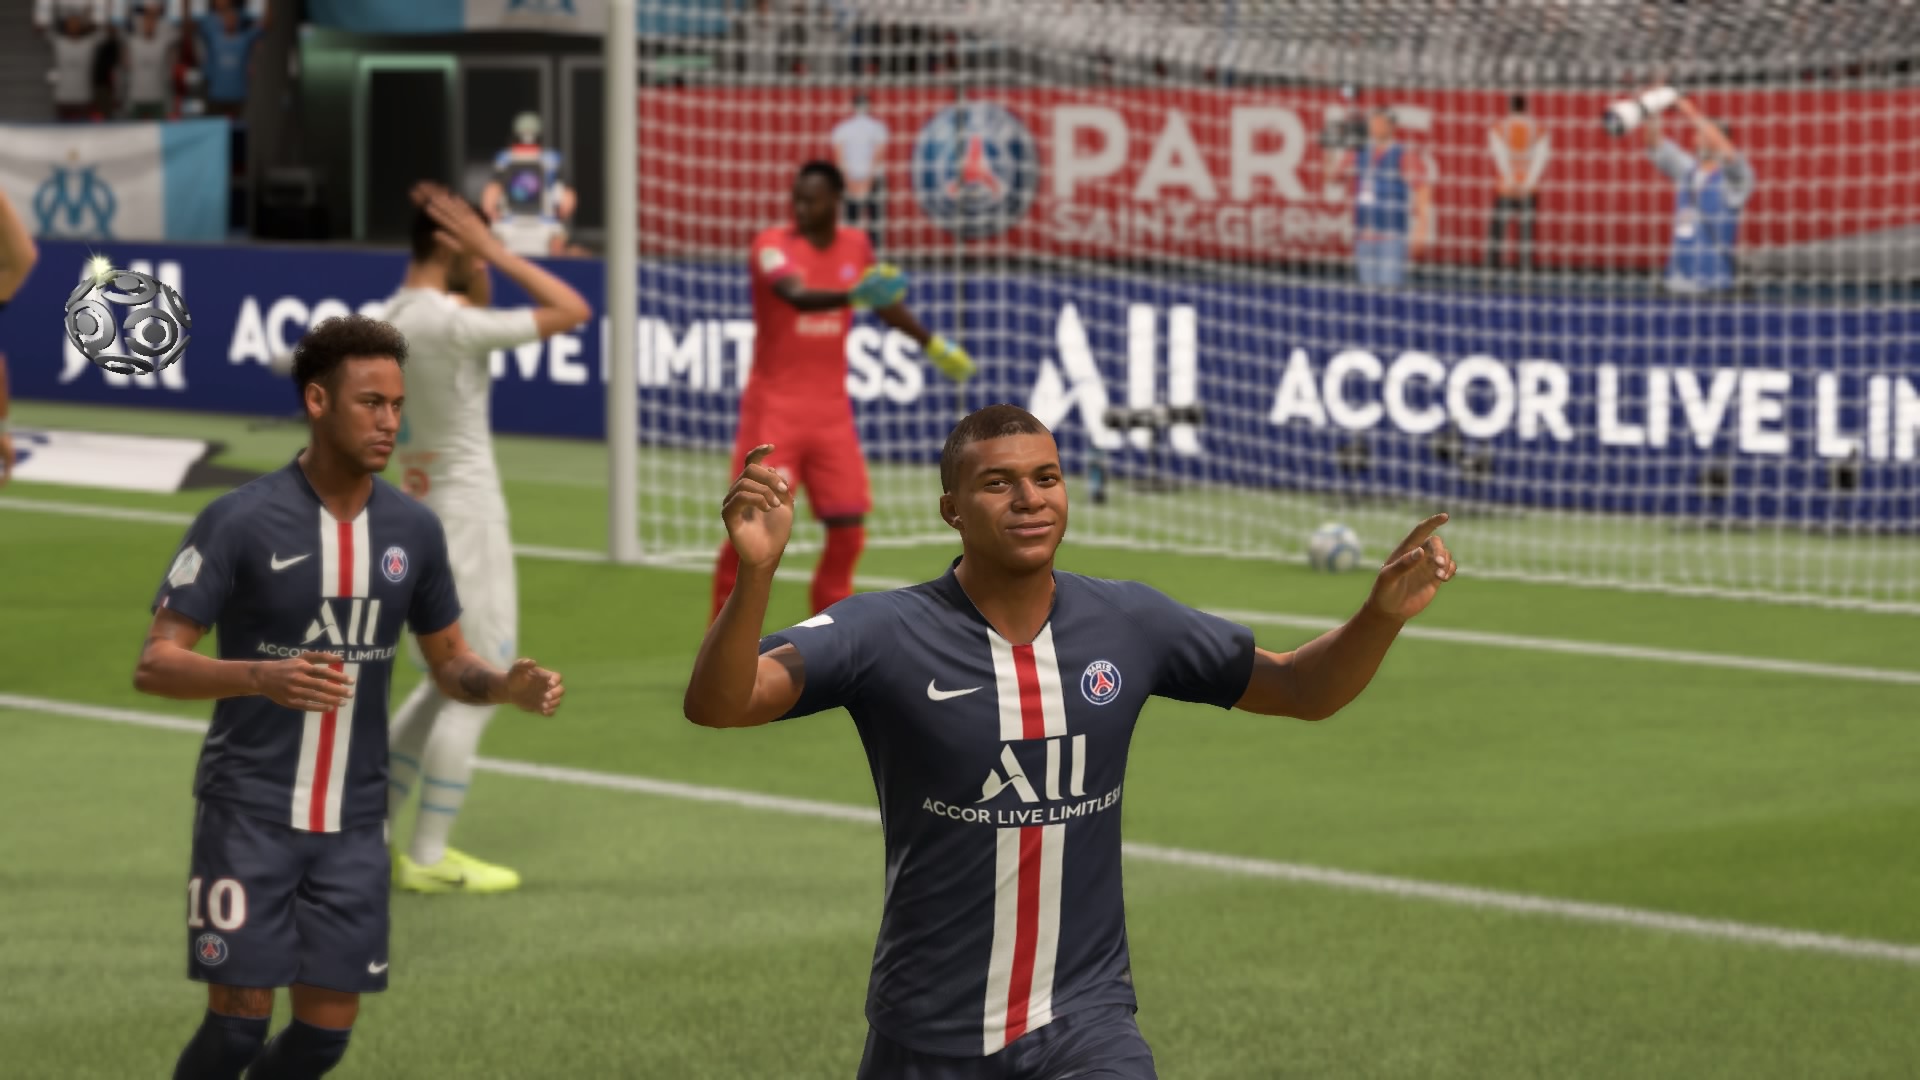 Fifa 20 Best Young Strikers 10 Wonderkid Forwards To Sign In